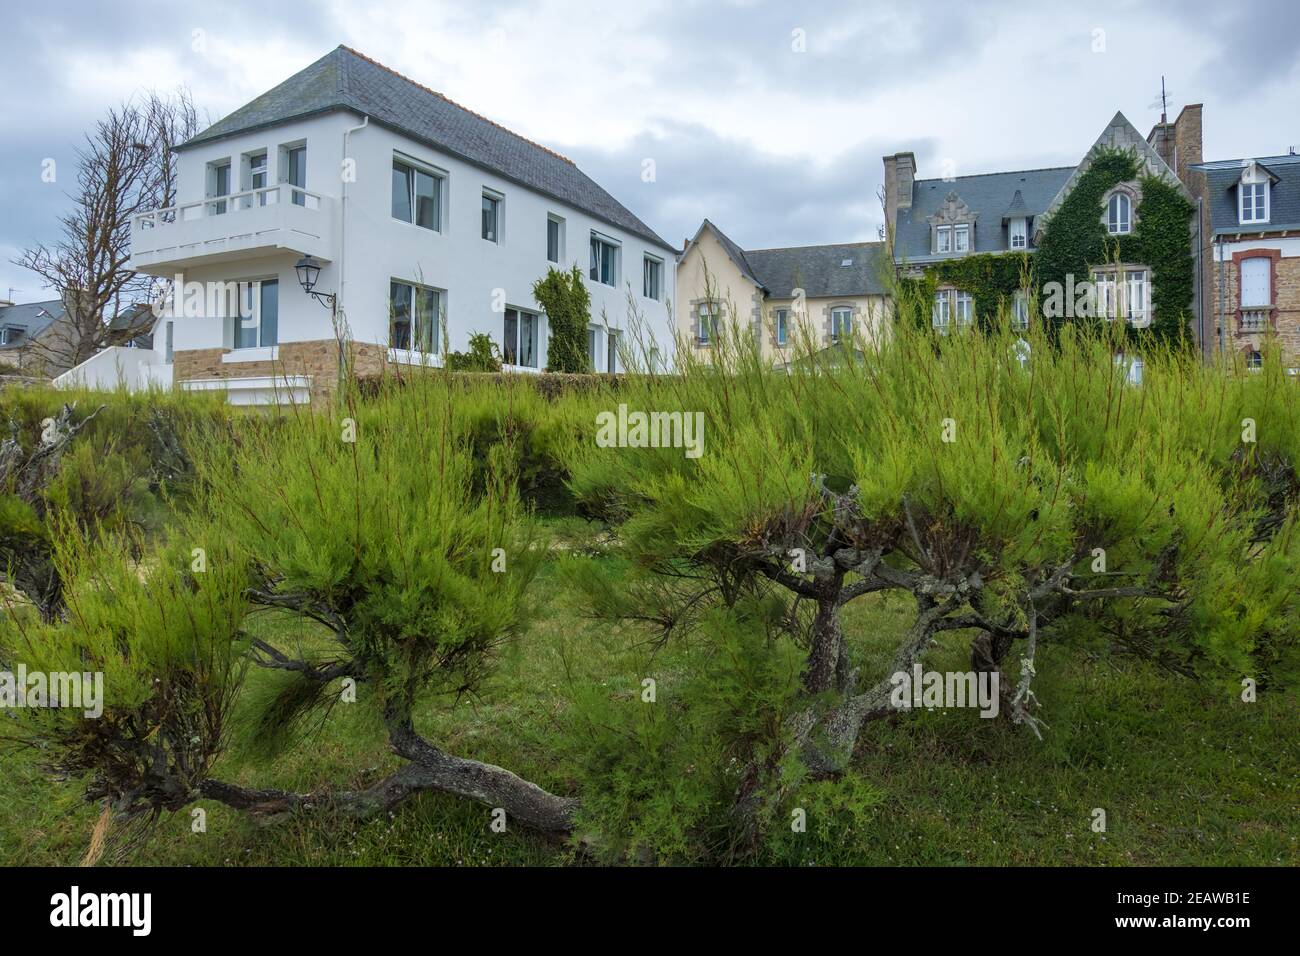 Roscoff, France - August 28, 2019: Cityscape with old residential buildings of Roscoff in Brittany Stock Photo